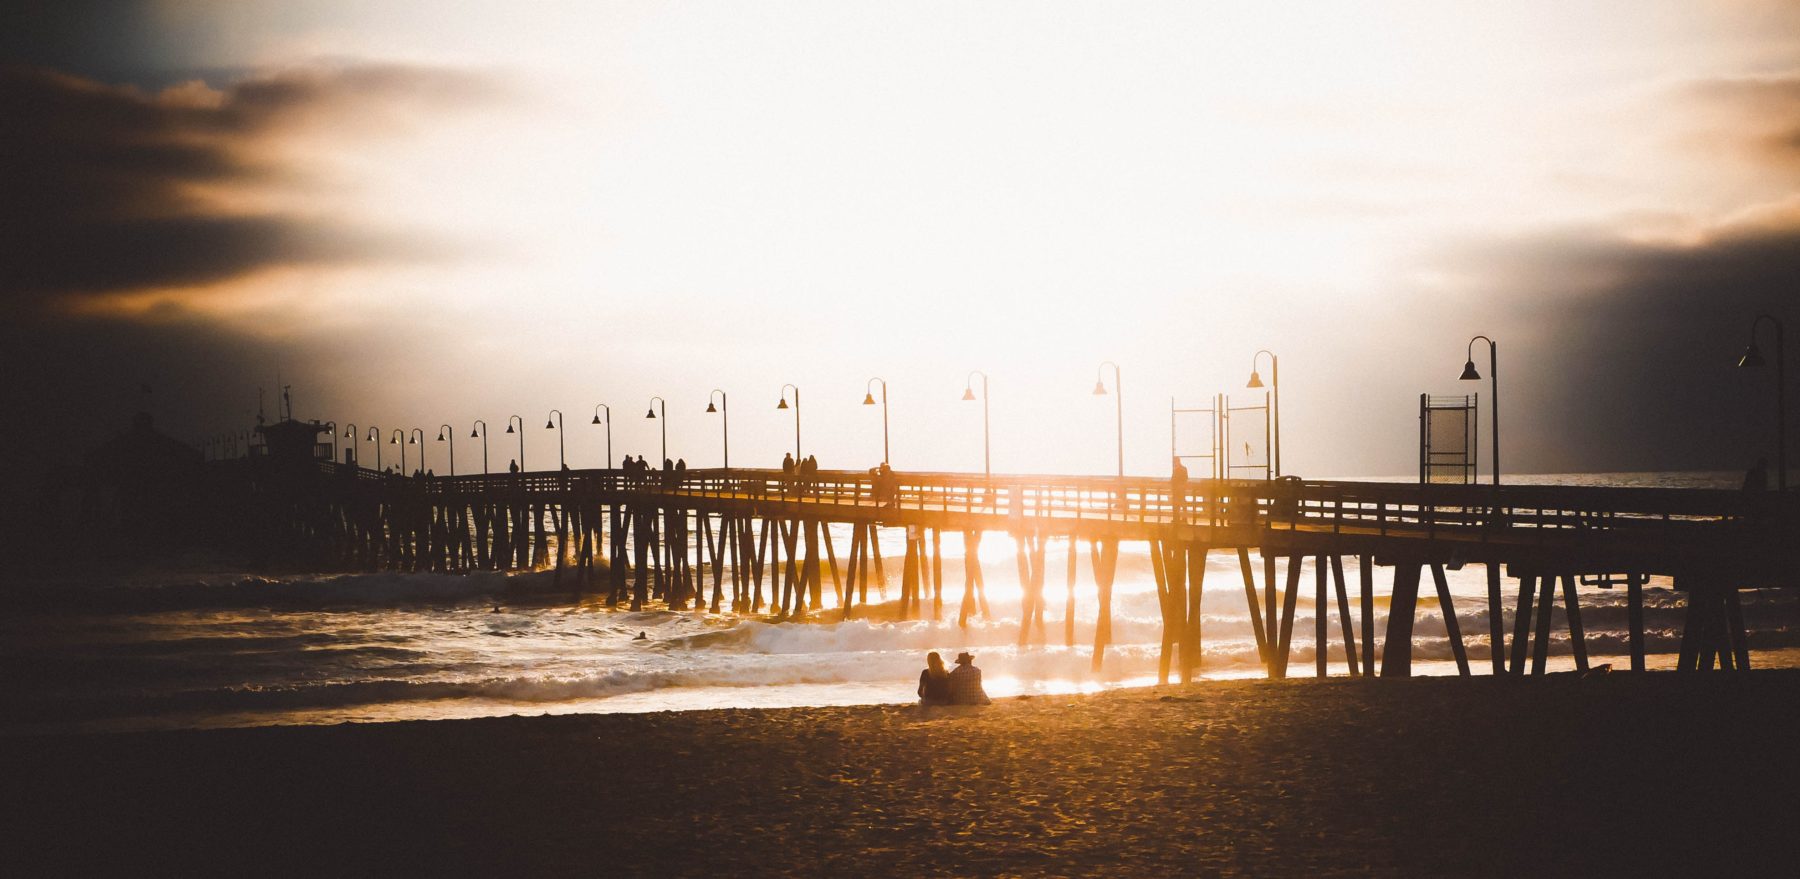 The sun setting over the pier at Imperial Beach, California.